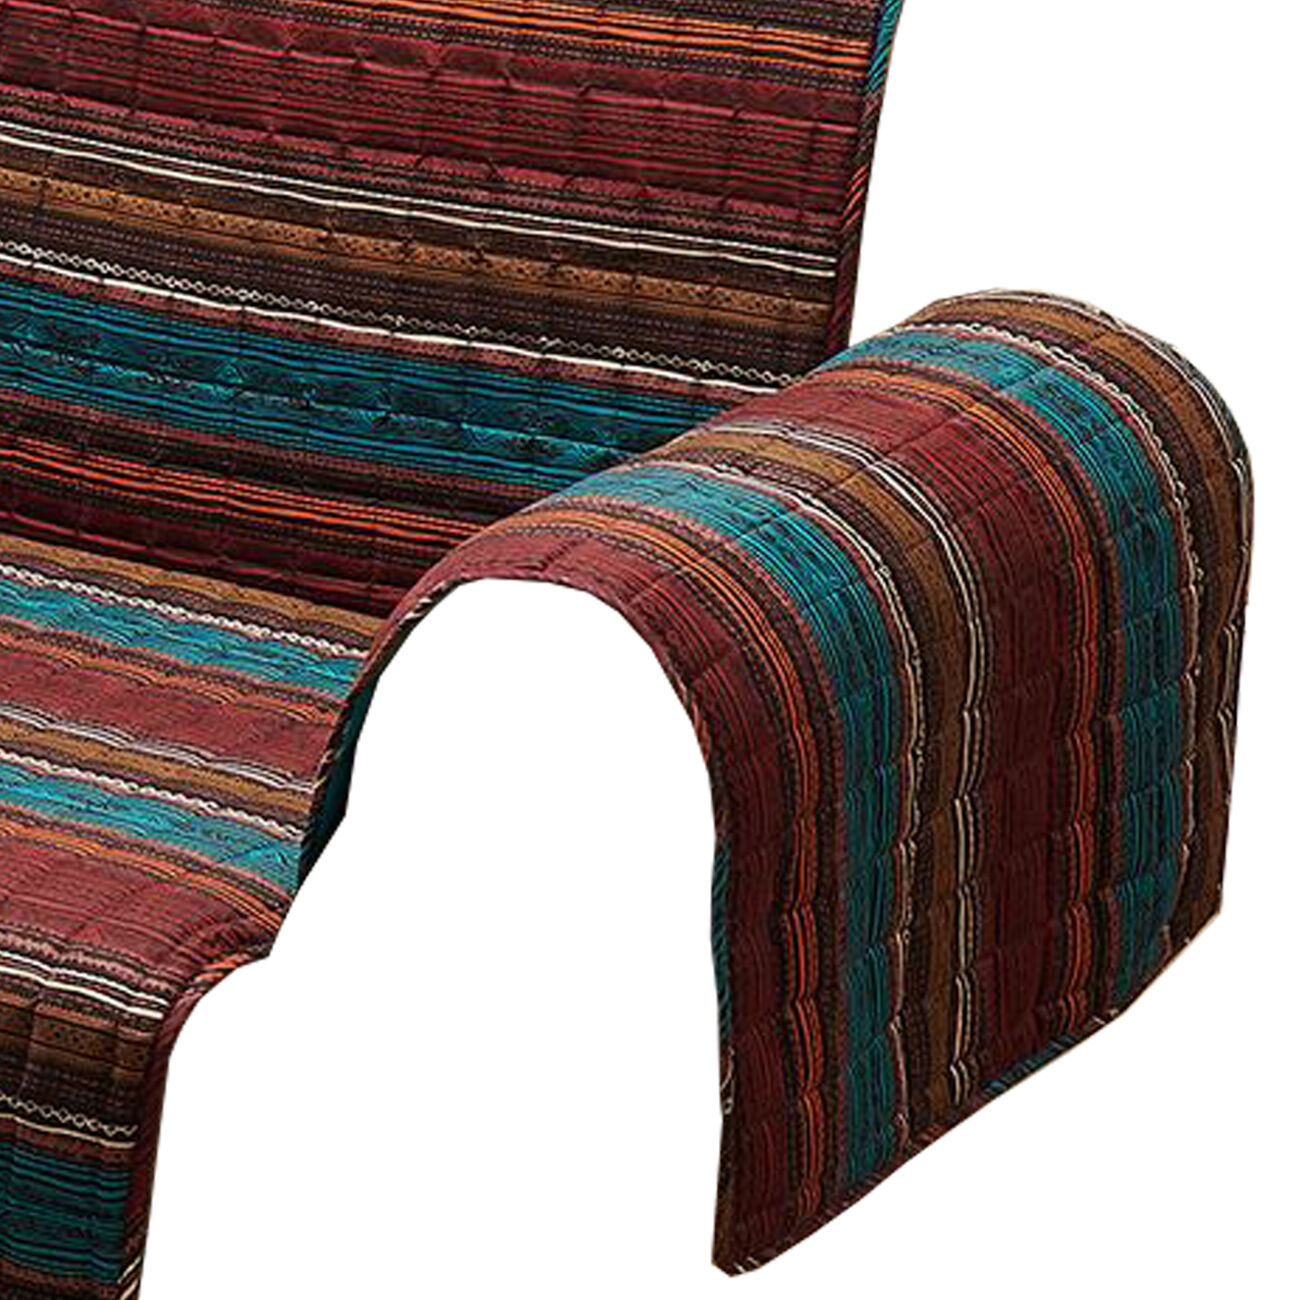 Oka Fabric Loveseat Protector with Striped Pattern, Brown and Orange